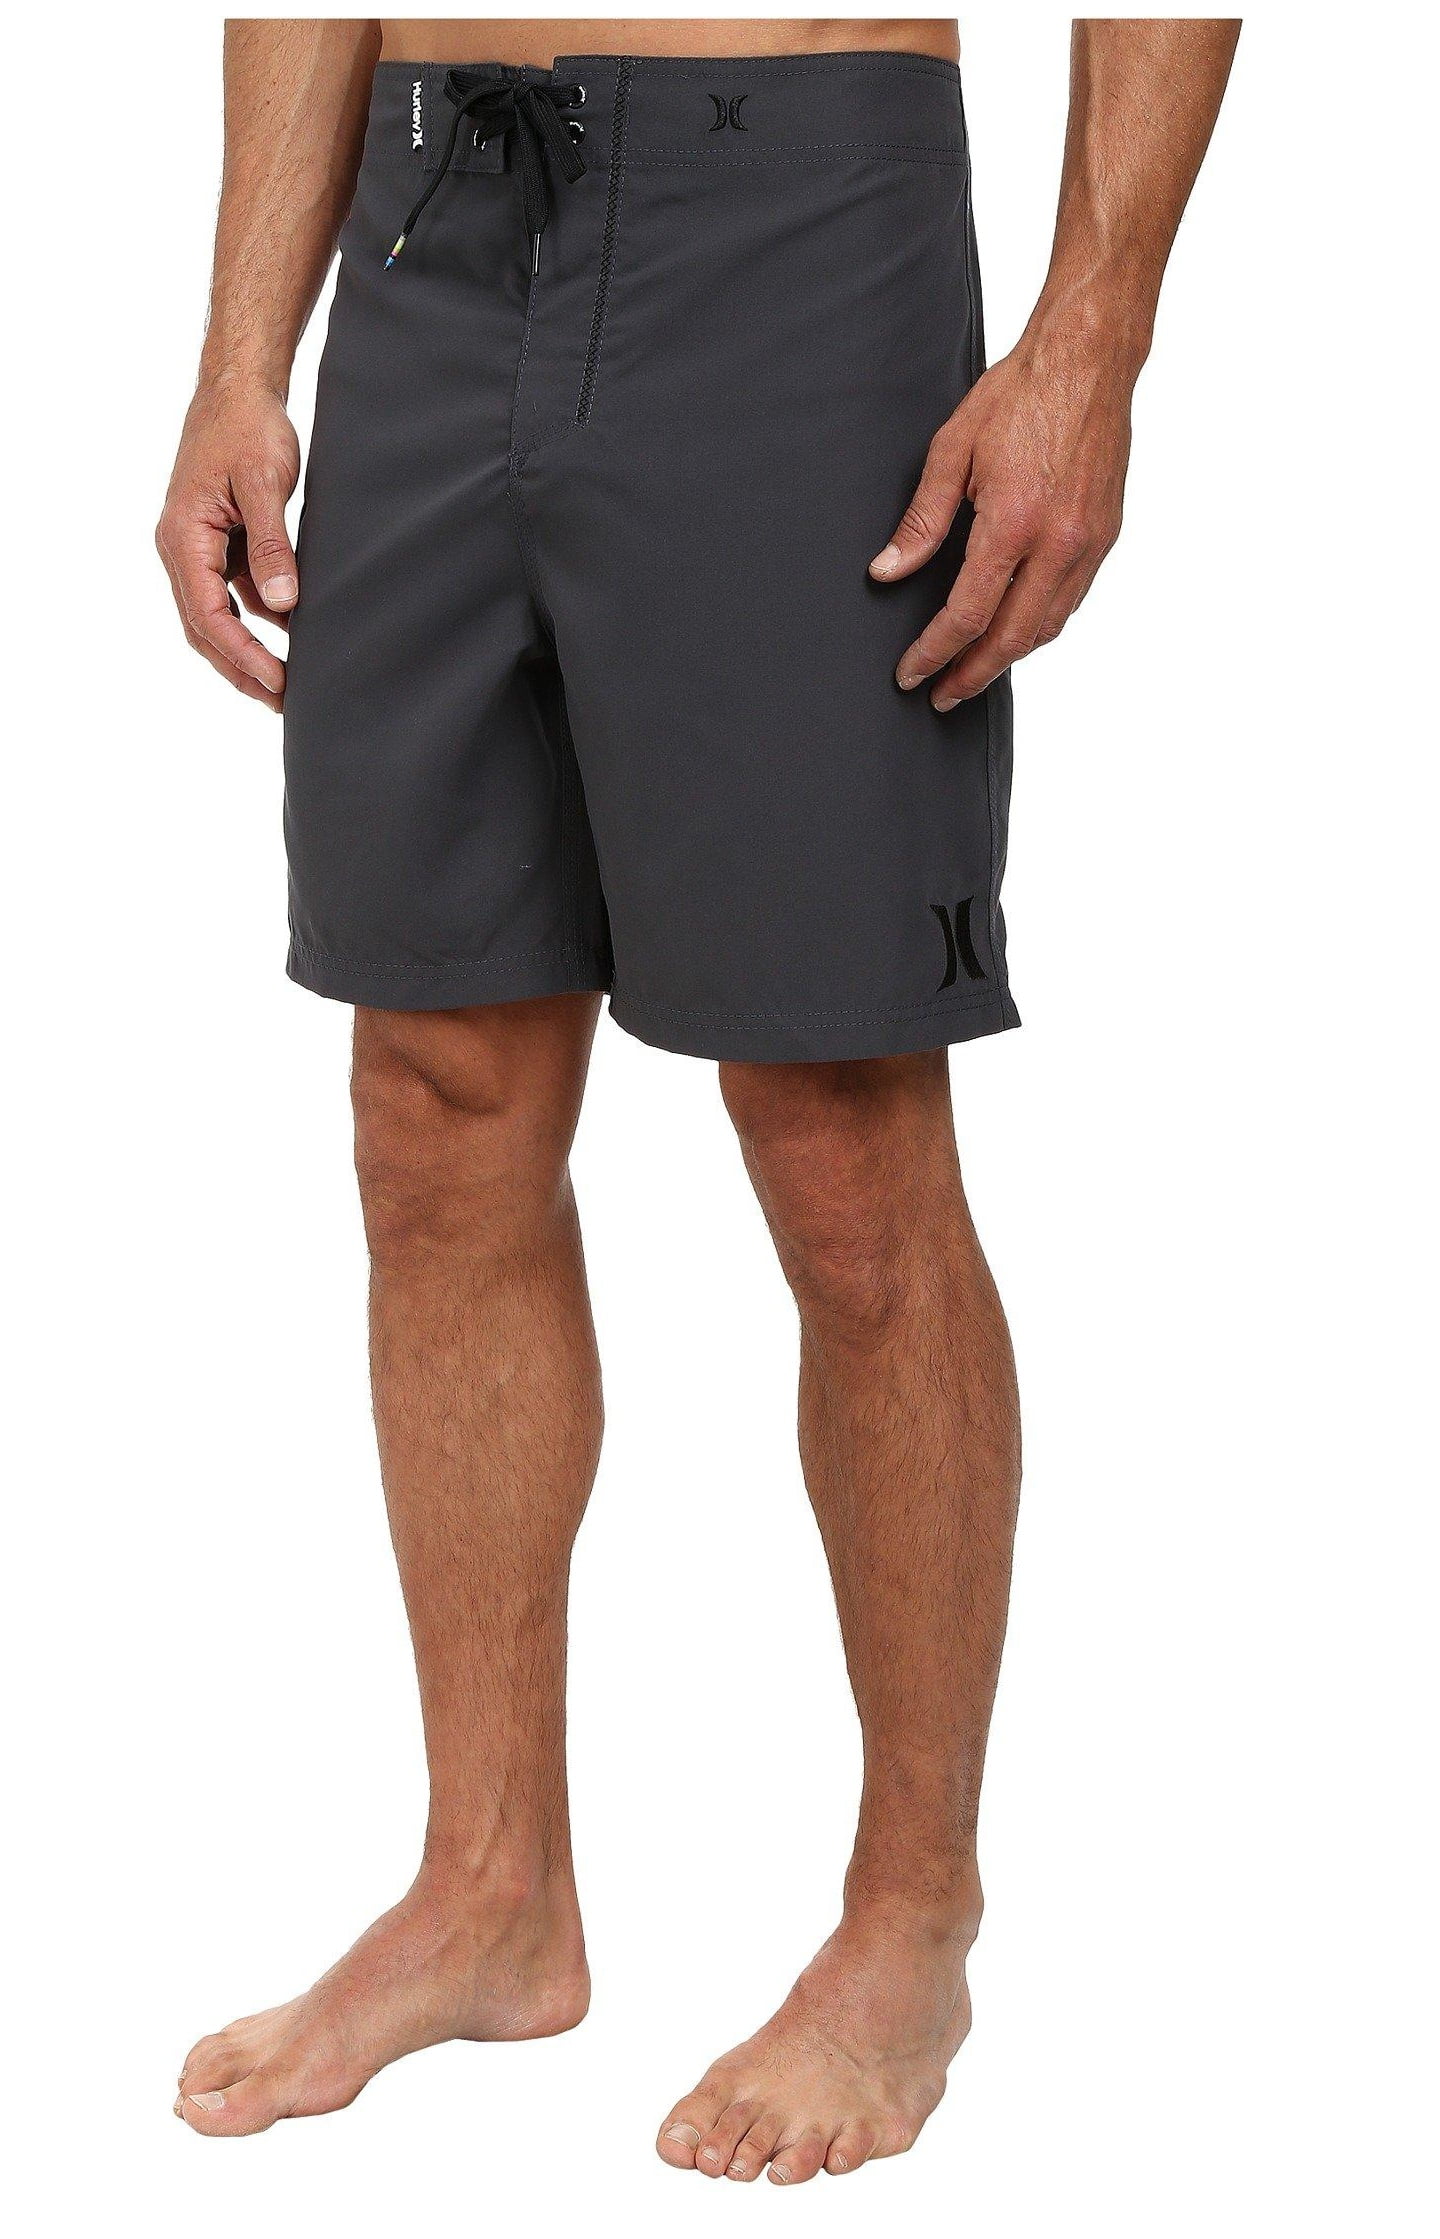 Hurley Men's One and Only 19 Inch Boardshorts - Walmart.com